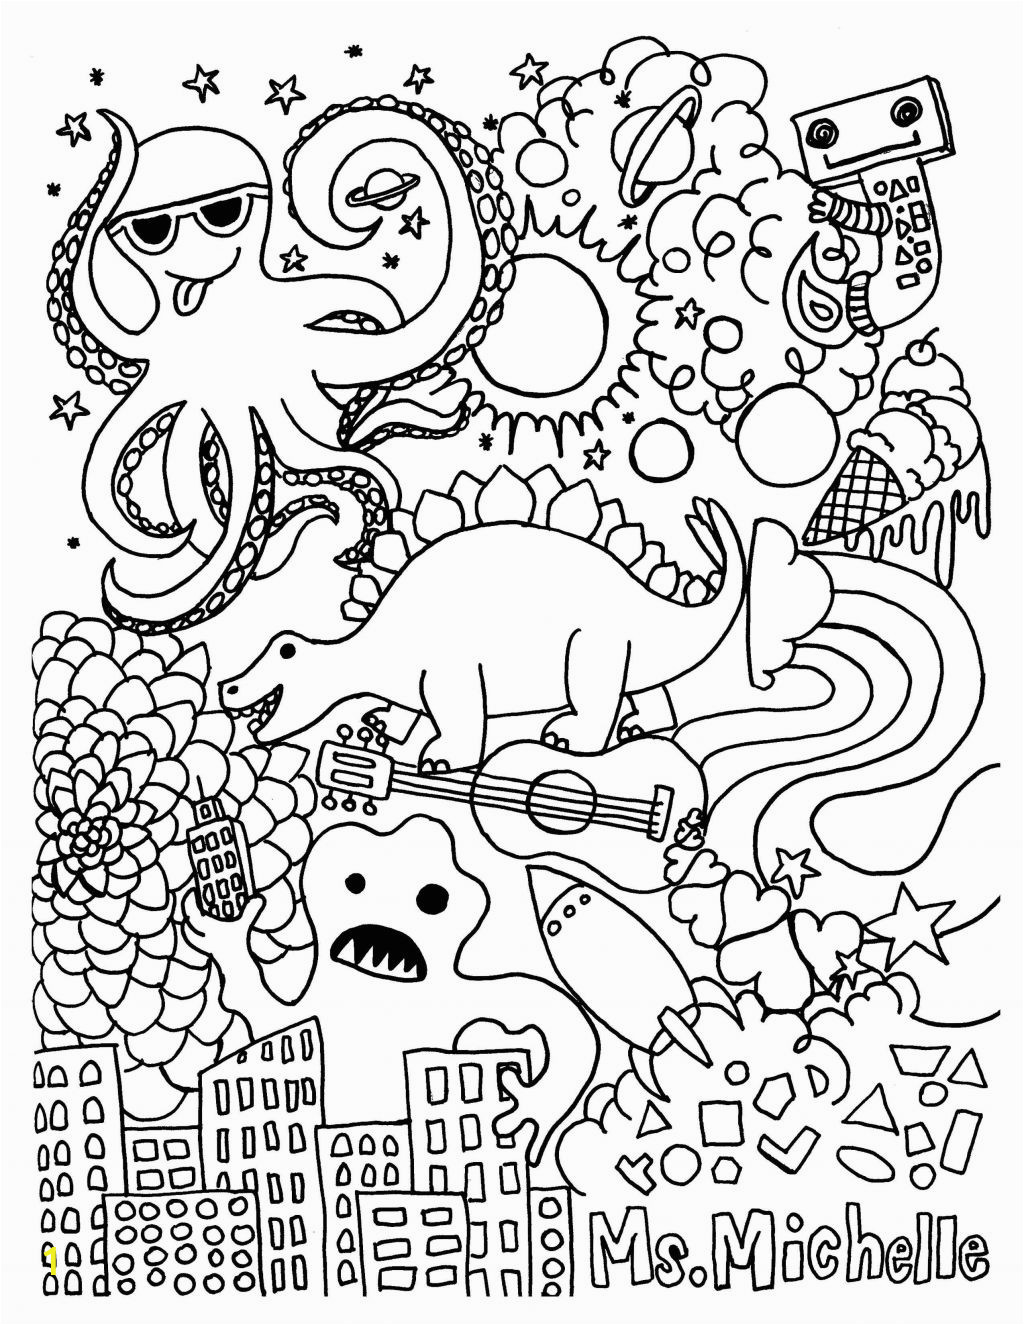 Free Printable Coloring Pages for Adults Only Coloring Pages Free Printable Coloring Pages for Adults